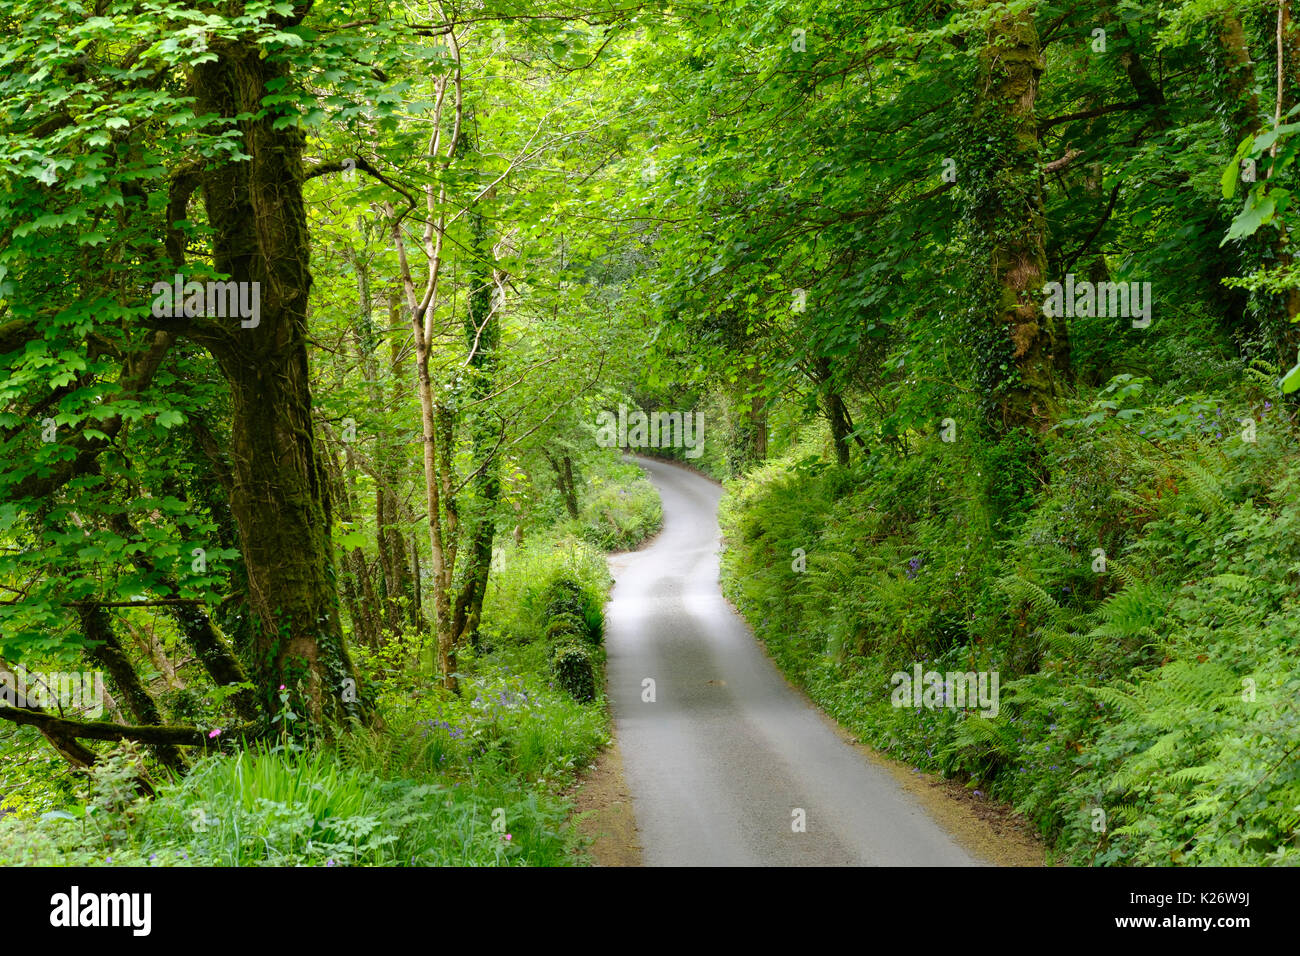 Small country road through forest, Constantine, Cornwall, England, United Kingdom Stock Photo